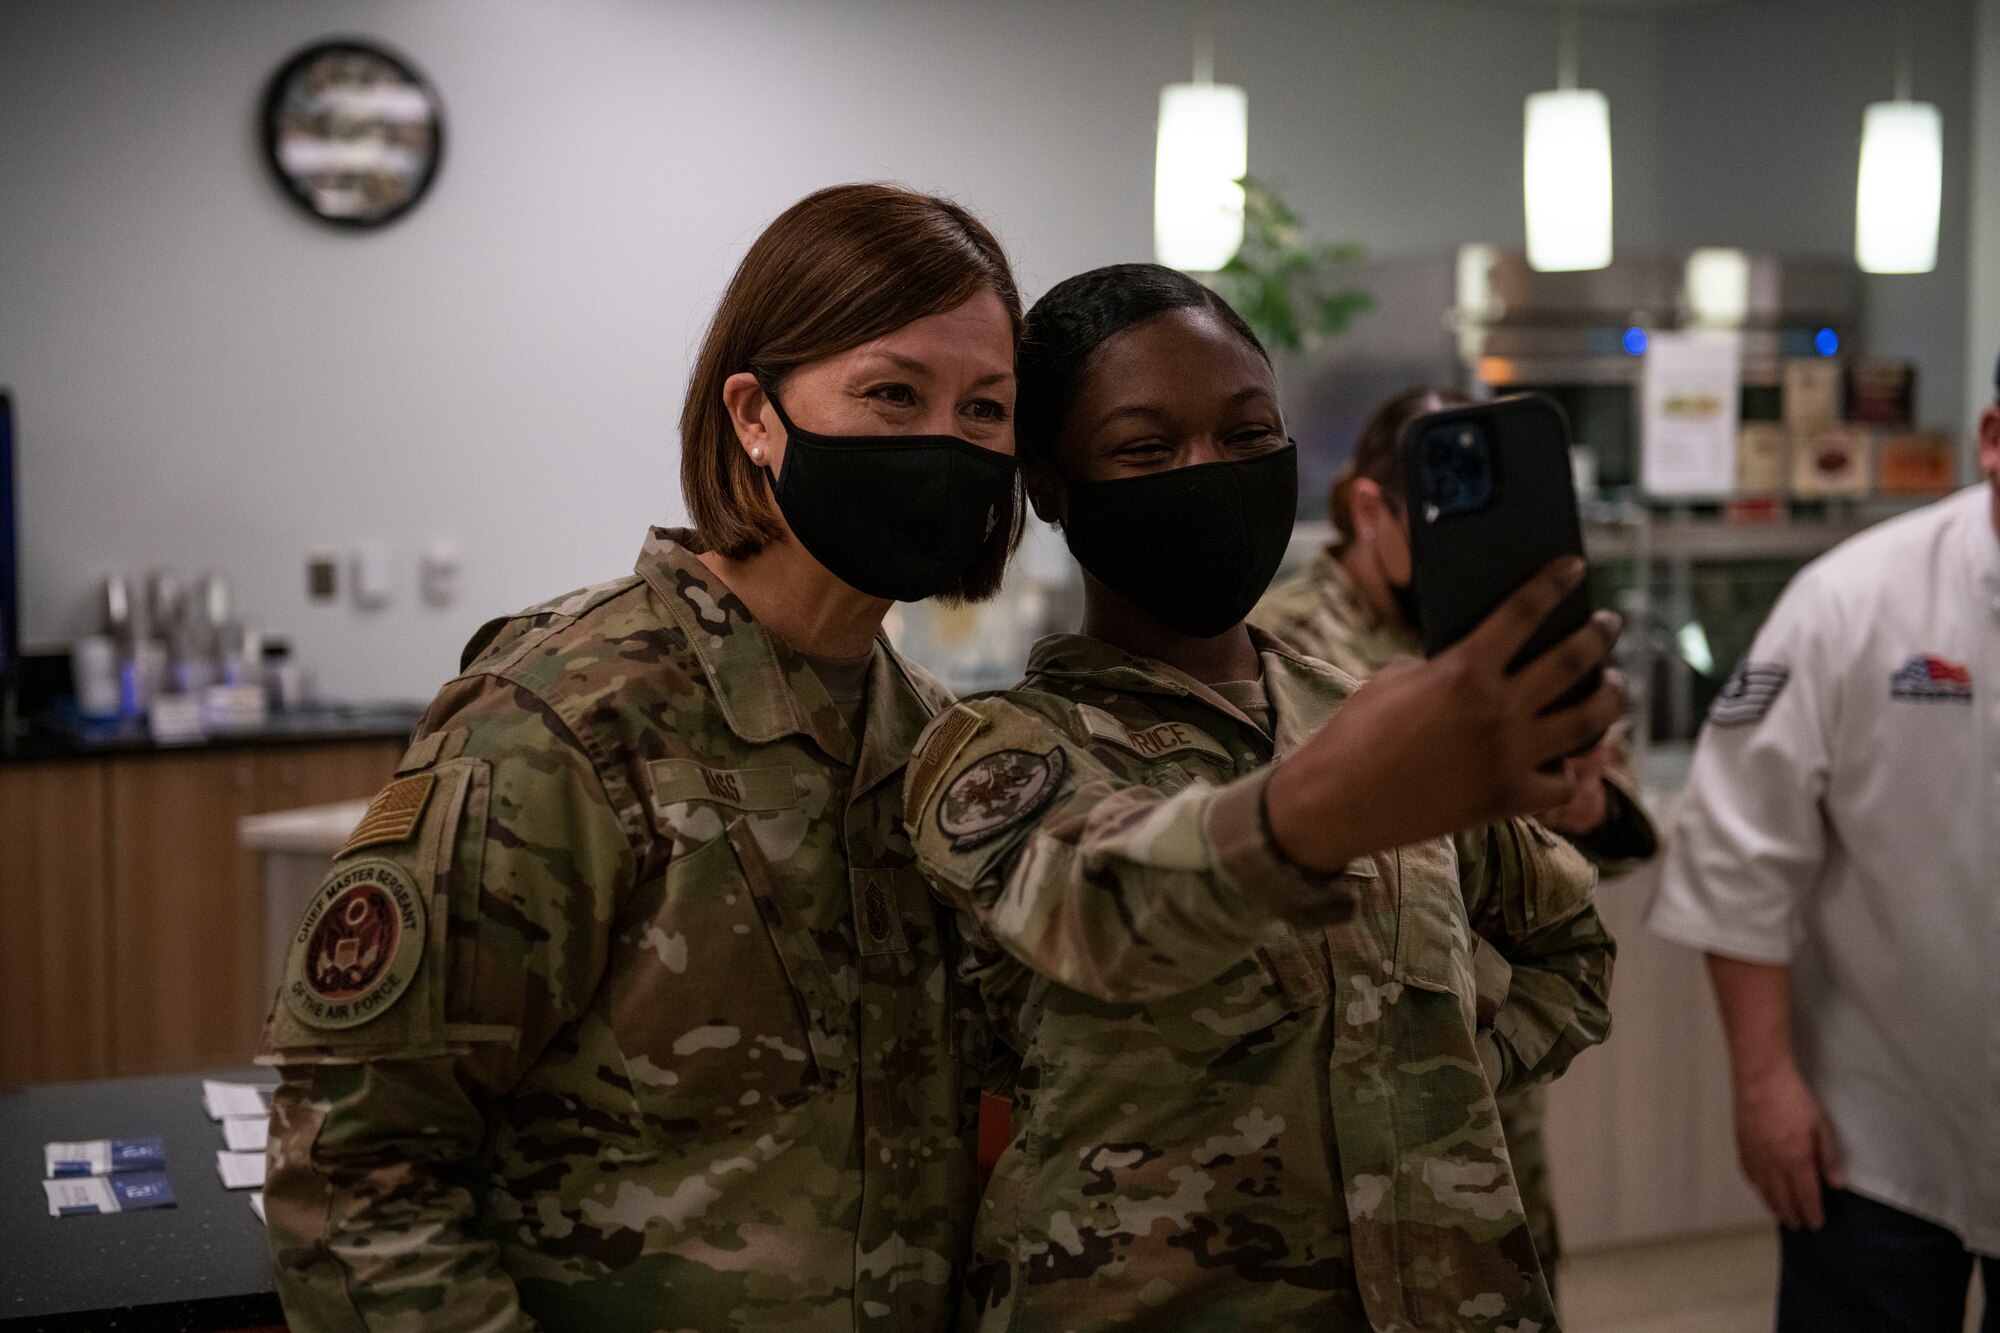 Chief Master Sgt. of the Air Force JoAnne Bass, left, takes a photo with an airman on Beale Air Force Base.